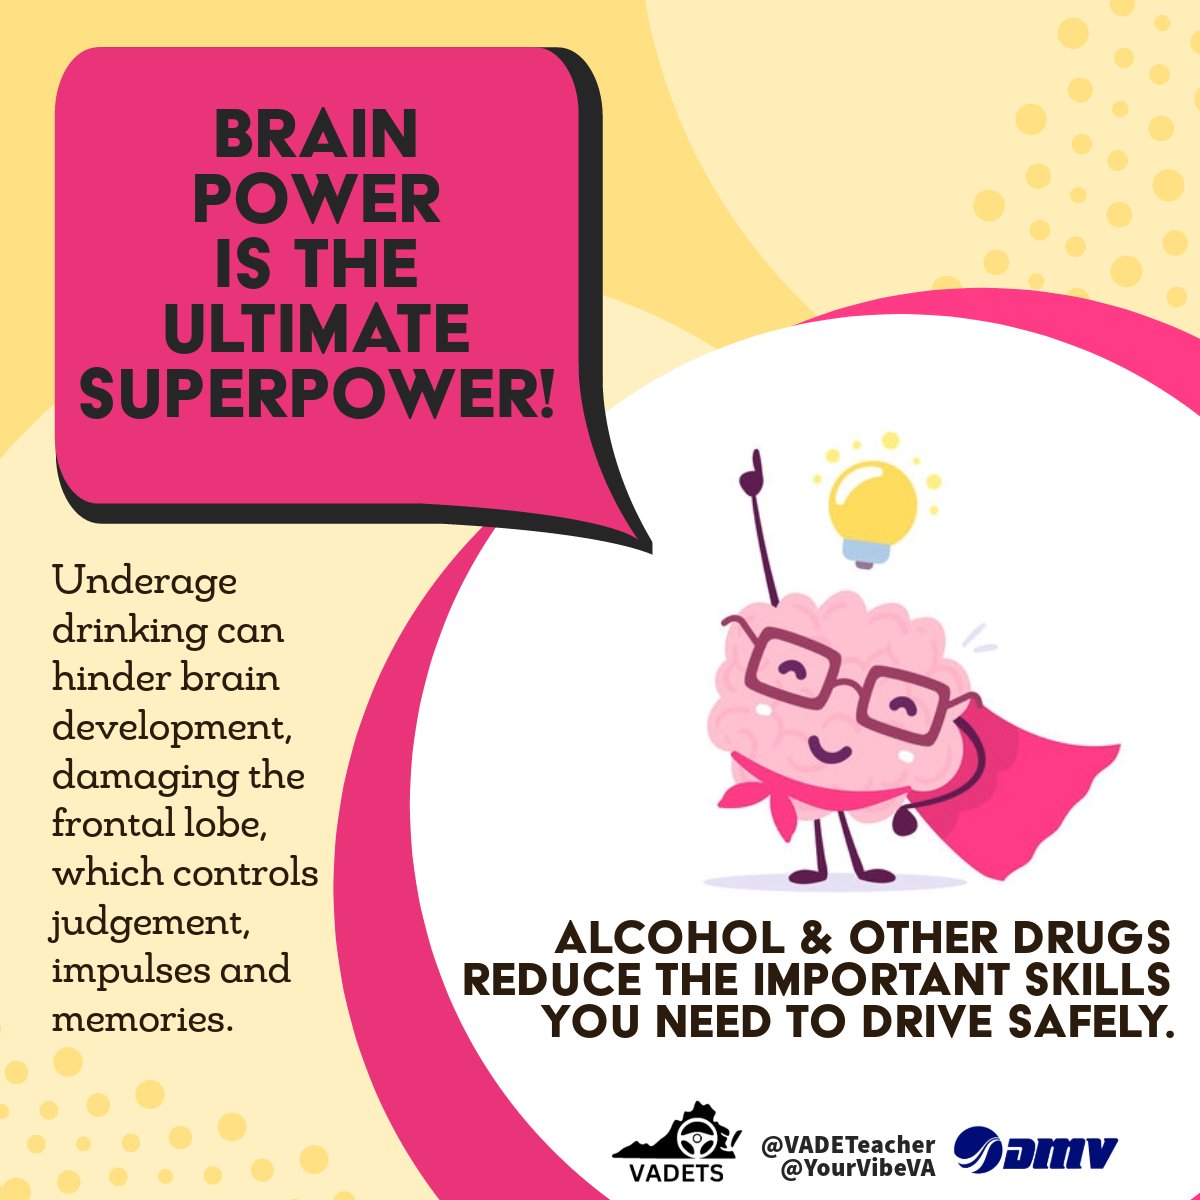 Brain Power is the ultimate Superpower! 🧠 Underage drinking can hinder brain development, damaging the frontal lobe, which controls judgement, impulses and memories. #MySpringVibe #ArriveLive